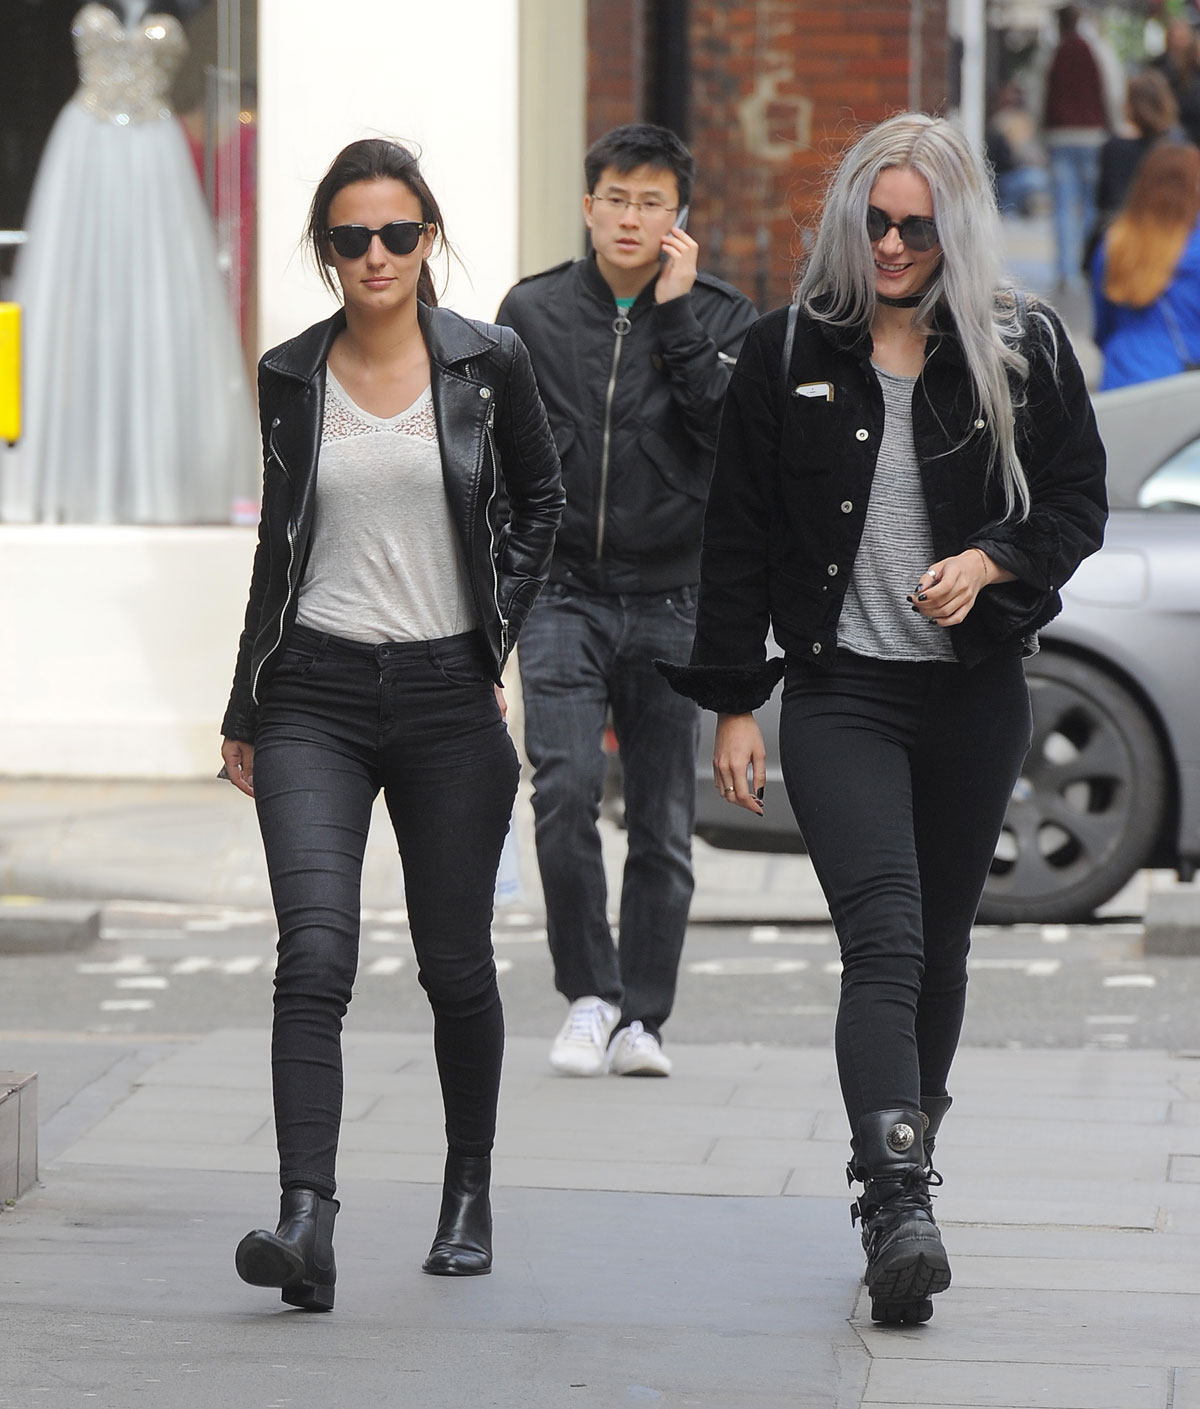 Lucy Watson leaving the Riding House Cafe